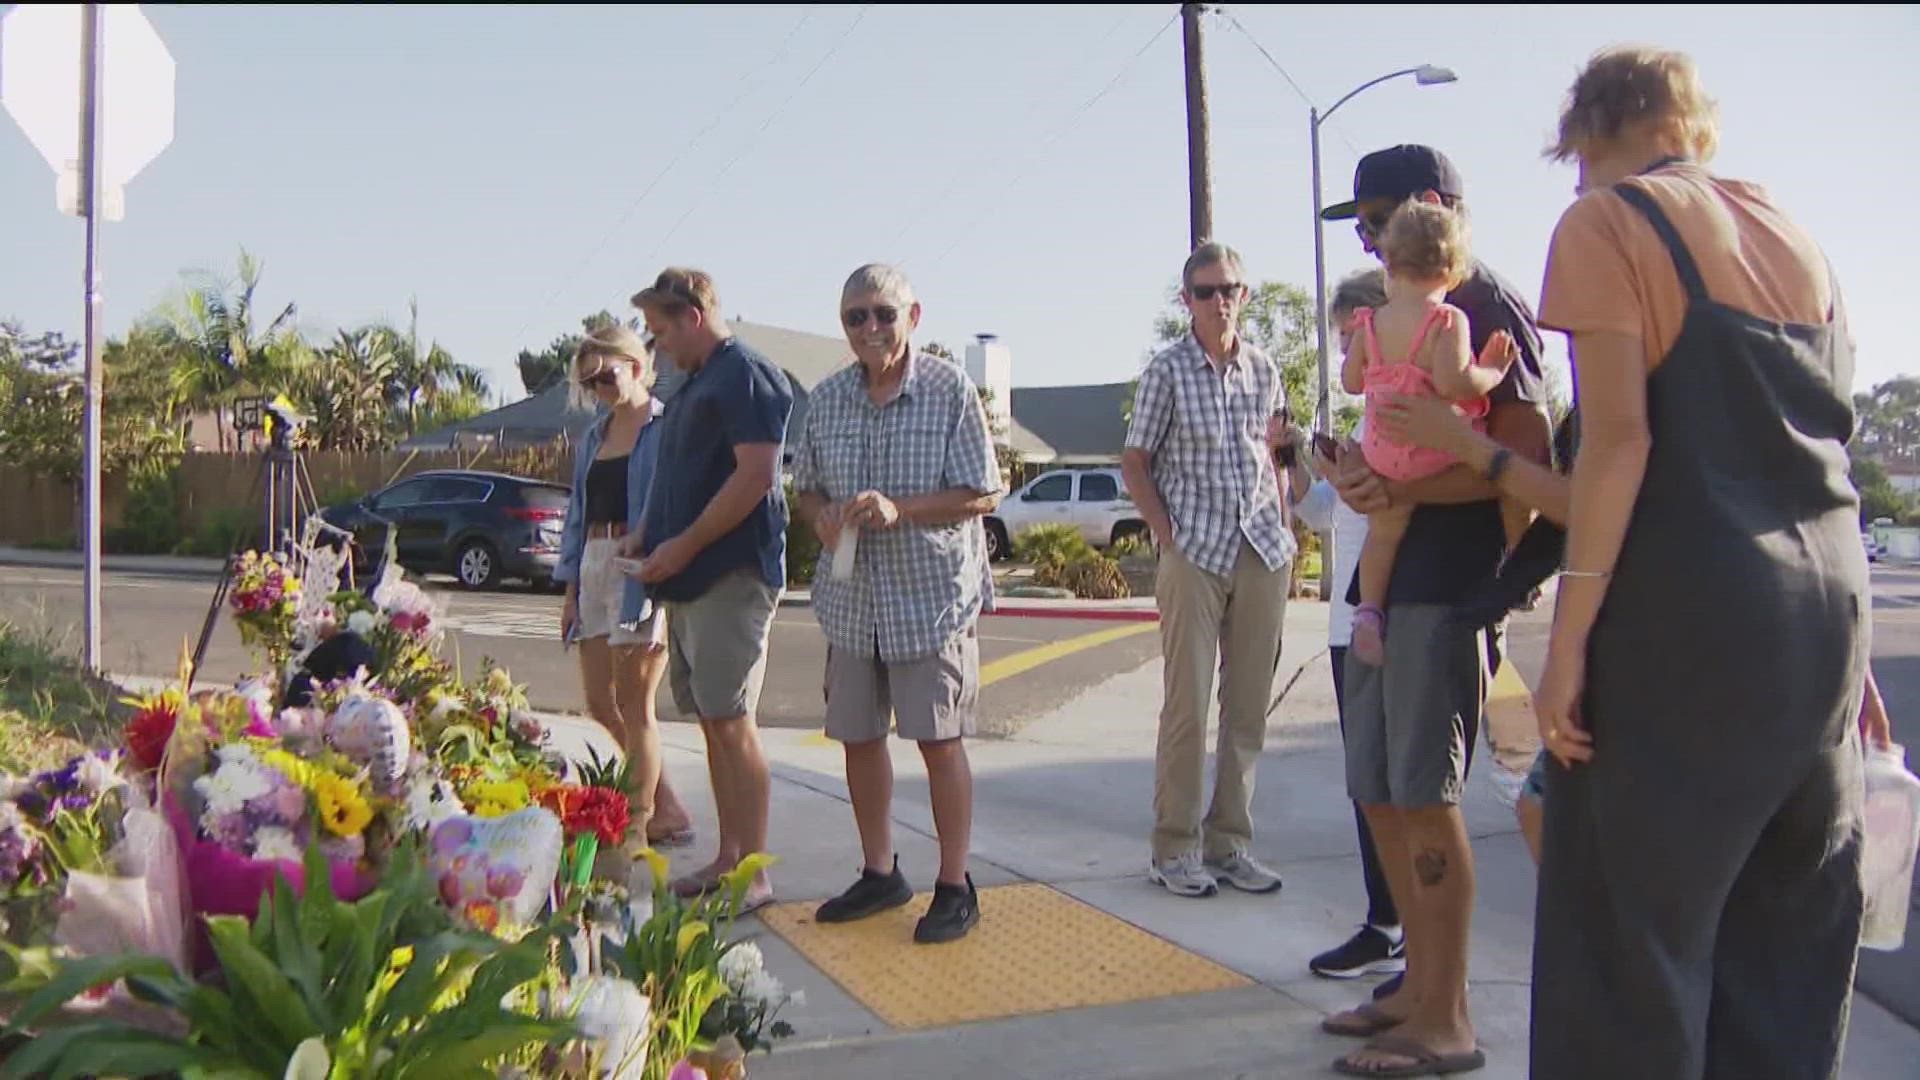 Her husband shared traffic safety and speeding concerns to the Carlsbad City Council less than one-month before her death.